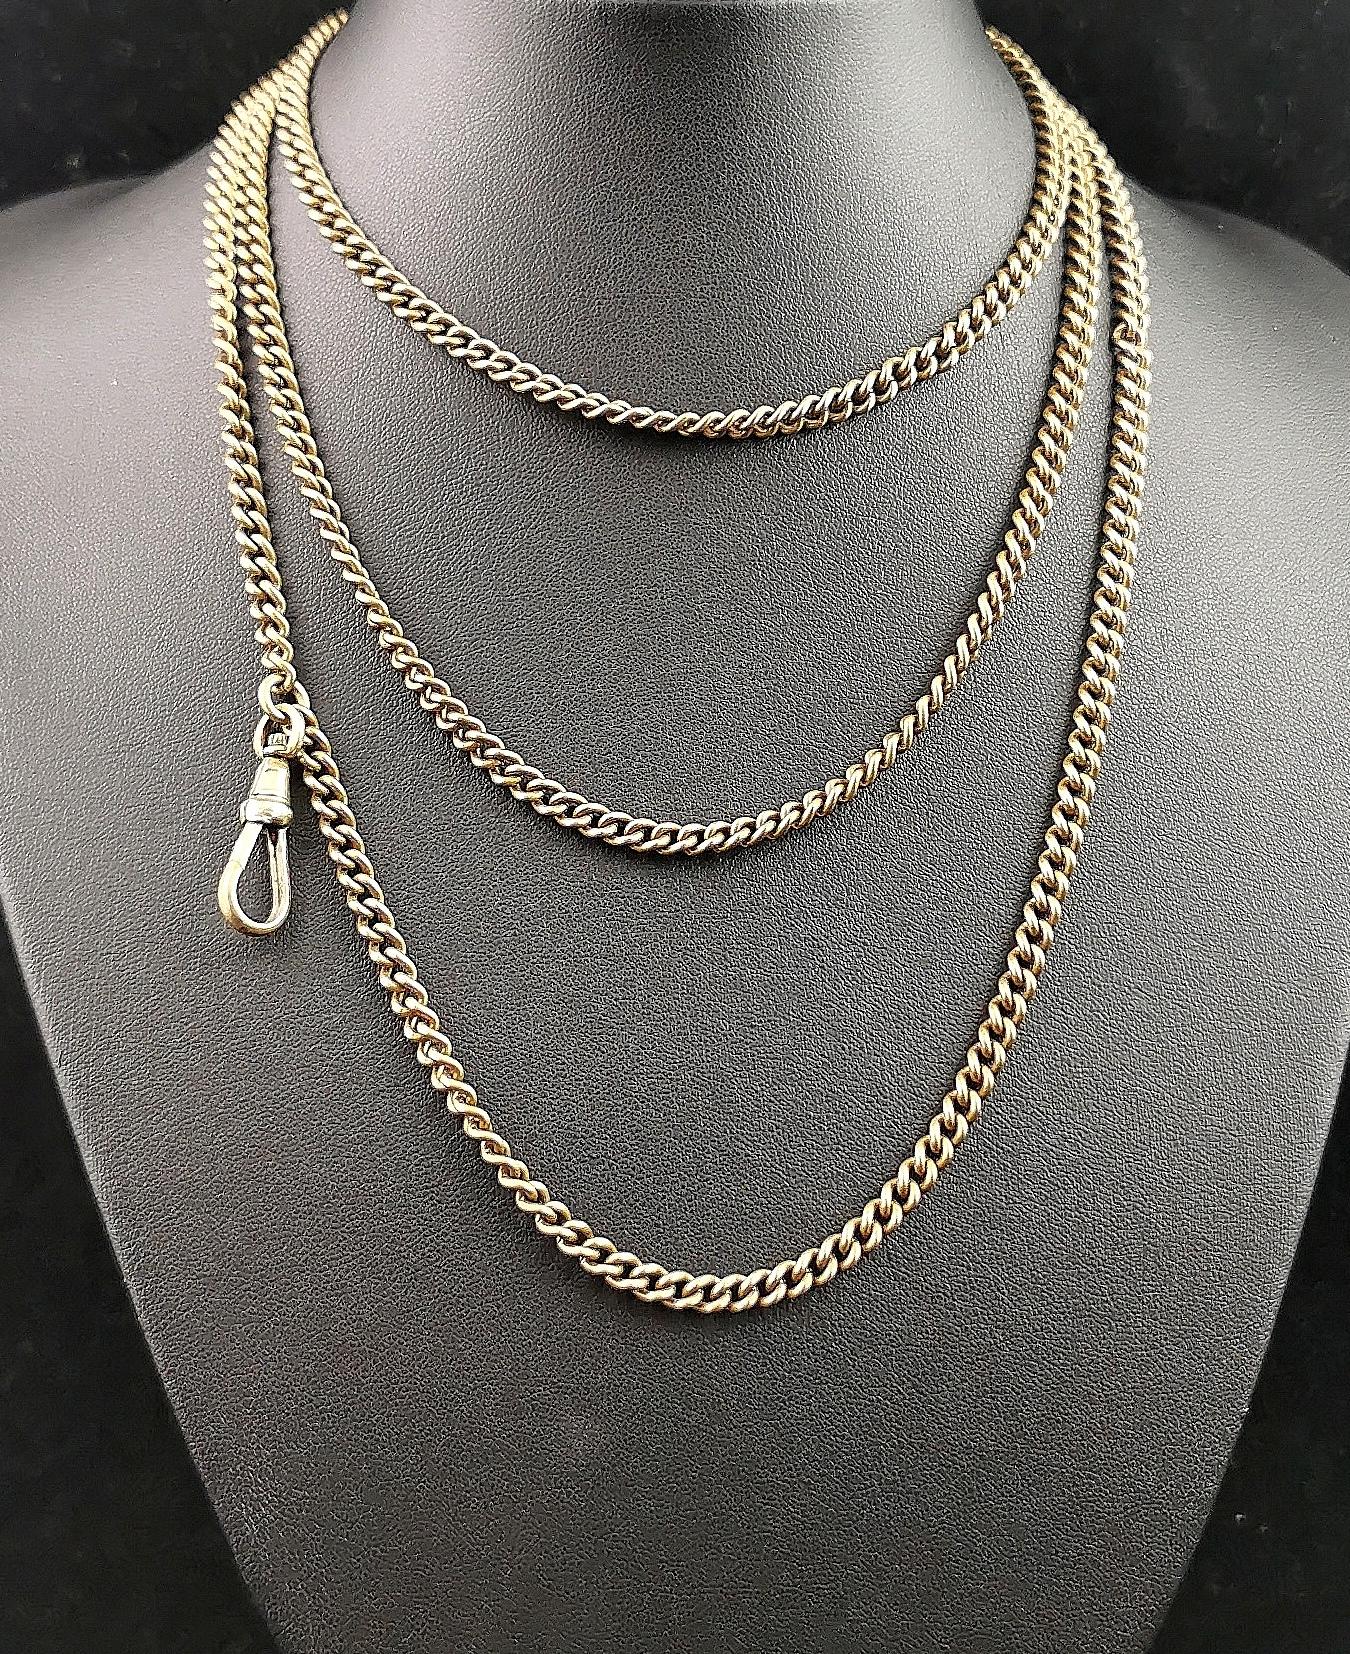 Antique Victorian longuard chain necklace, Gold plated, Curb link  3